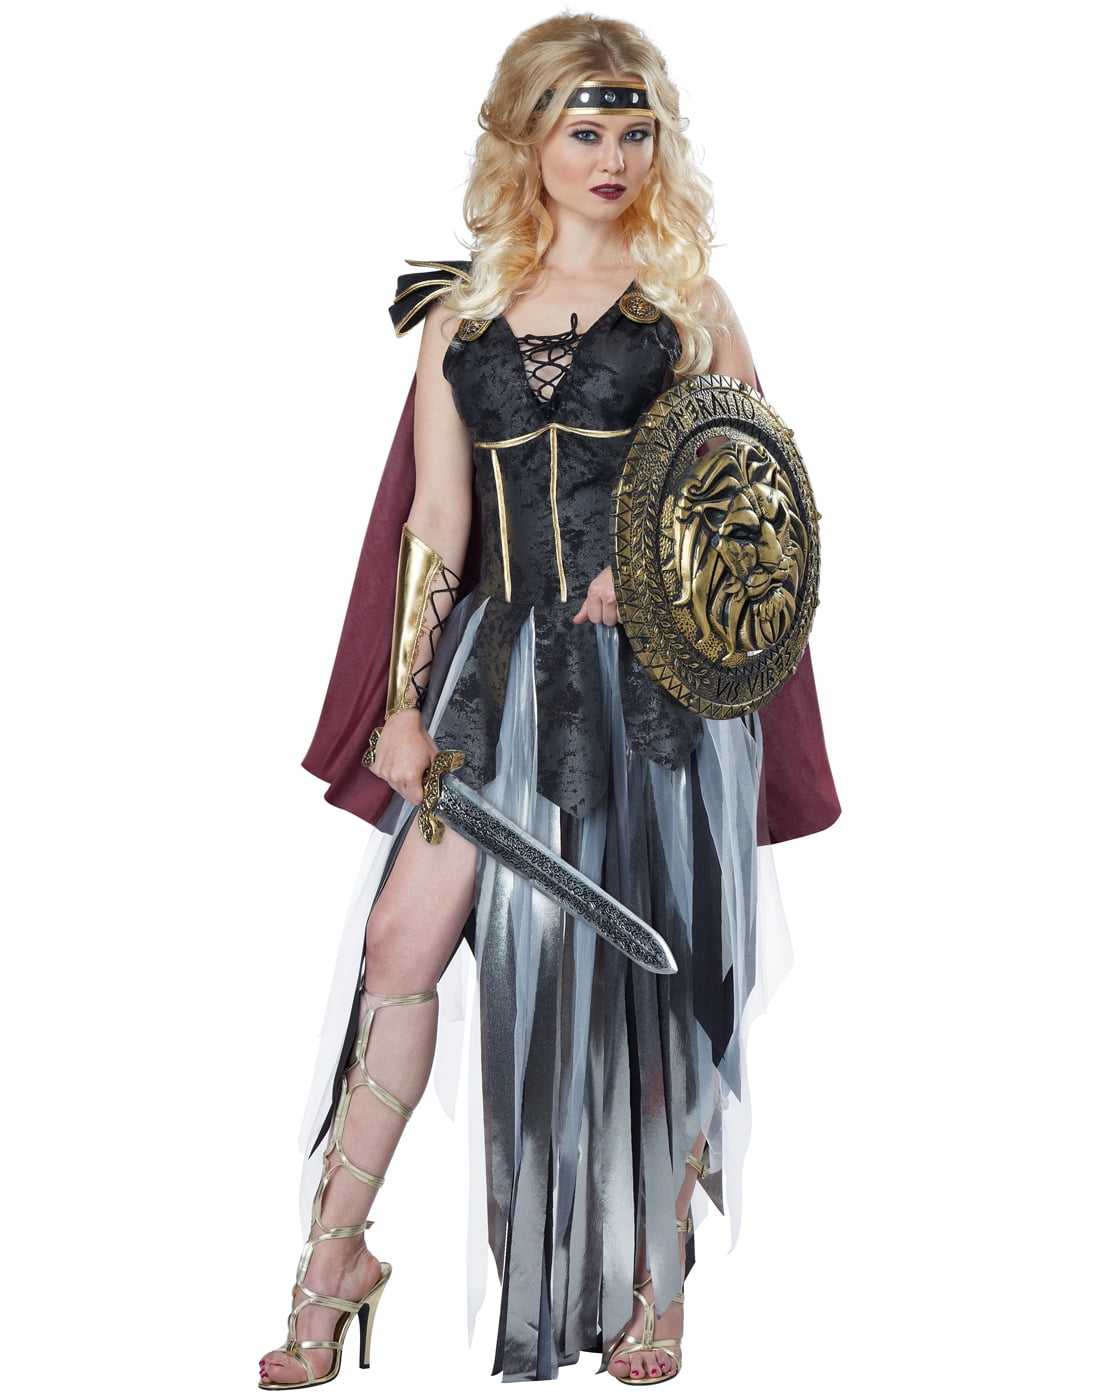  Yummy Bee - Viking Costume Women - Warrior Princess Costume -  Roman Costume Women - Gladiator Costume Adult - Plus Size Costumes Size 4-6  : Clothing, Shoes & Jewelry